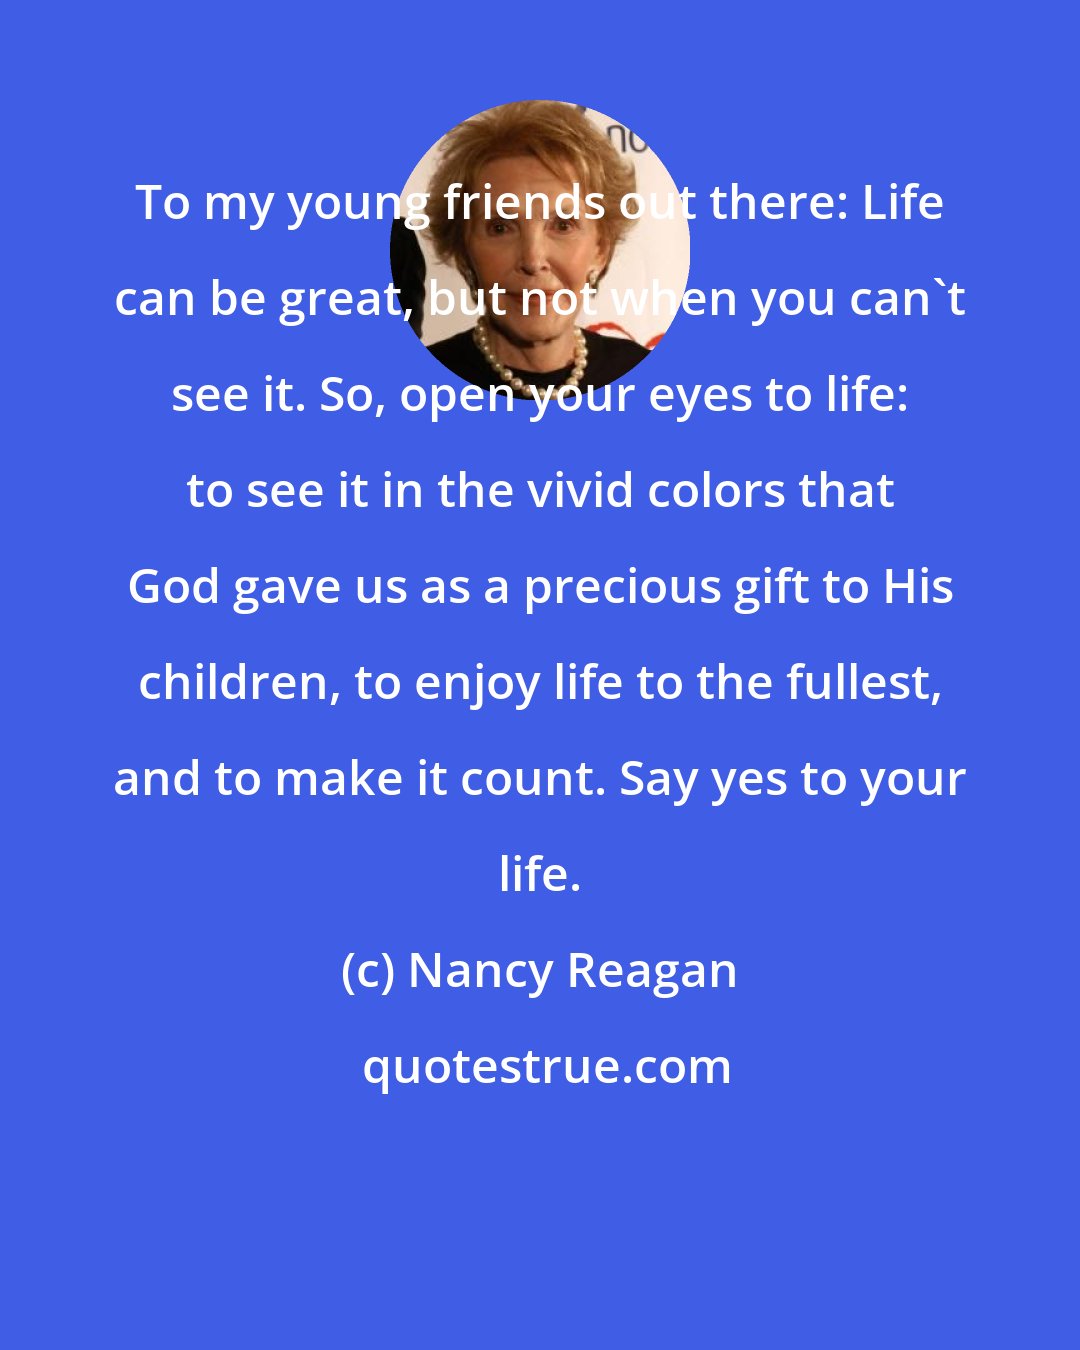 Nancy Reagan: To my young friends out there: Life can be great, but not when you can't see it. So, open your eyes to life: to see it in the vivid colors that God gave us as a precious gift to His children, to enjoy life to the fullest, and to make it count. Say yes to your life.